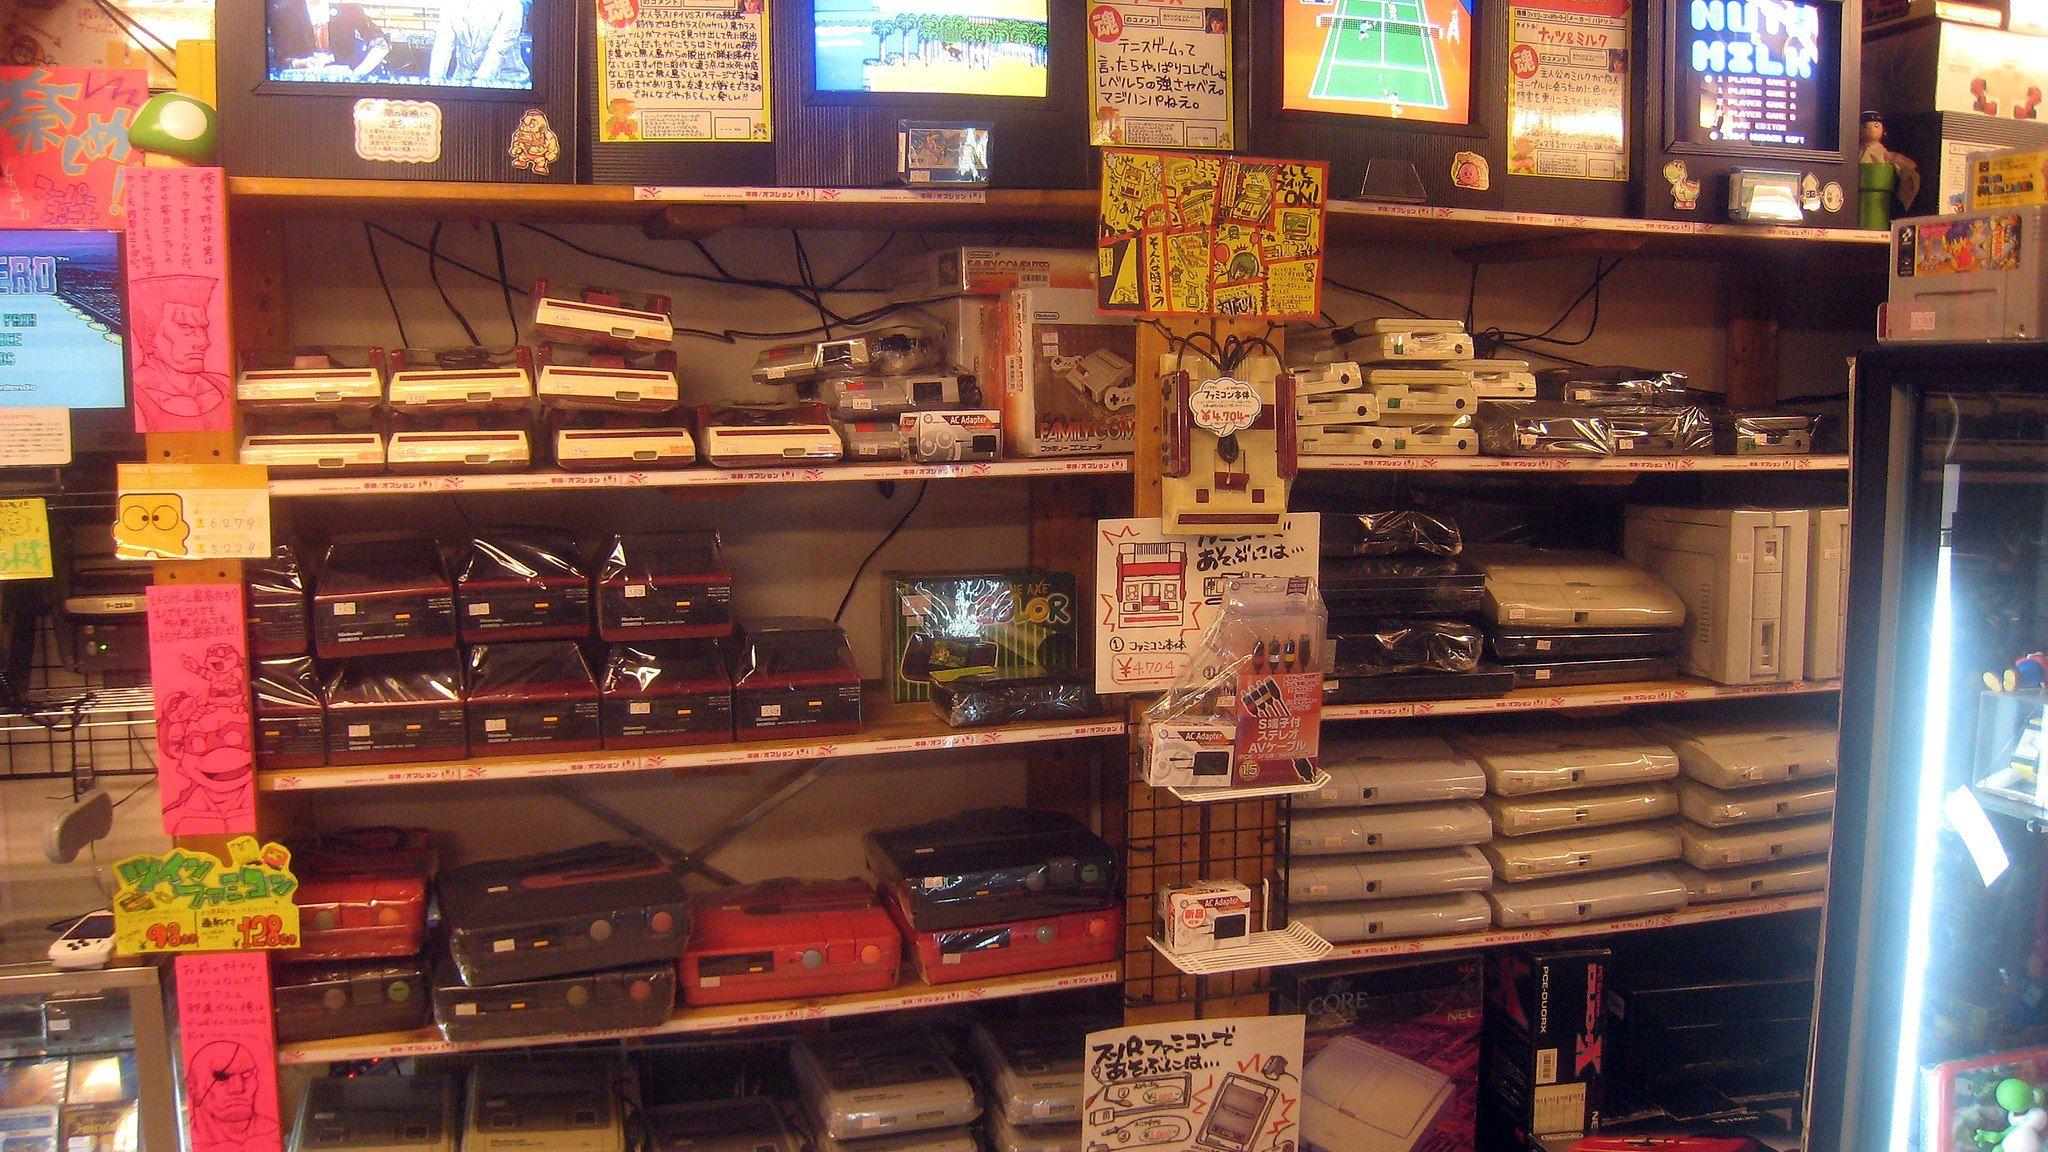 Super Potato is a retro gaming store in Akihabara that has an amazing amount of video games for almost every console ever made.